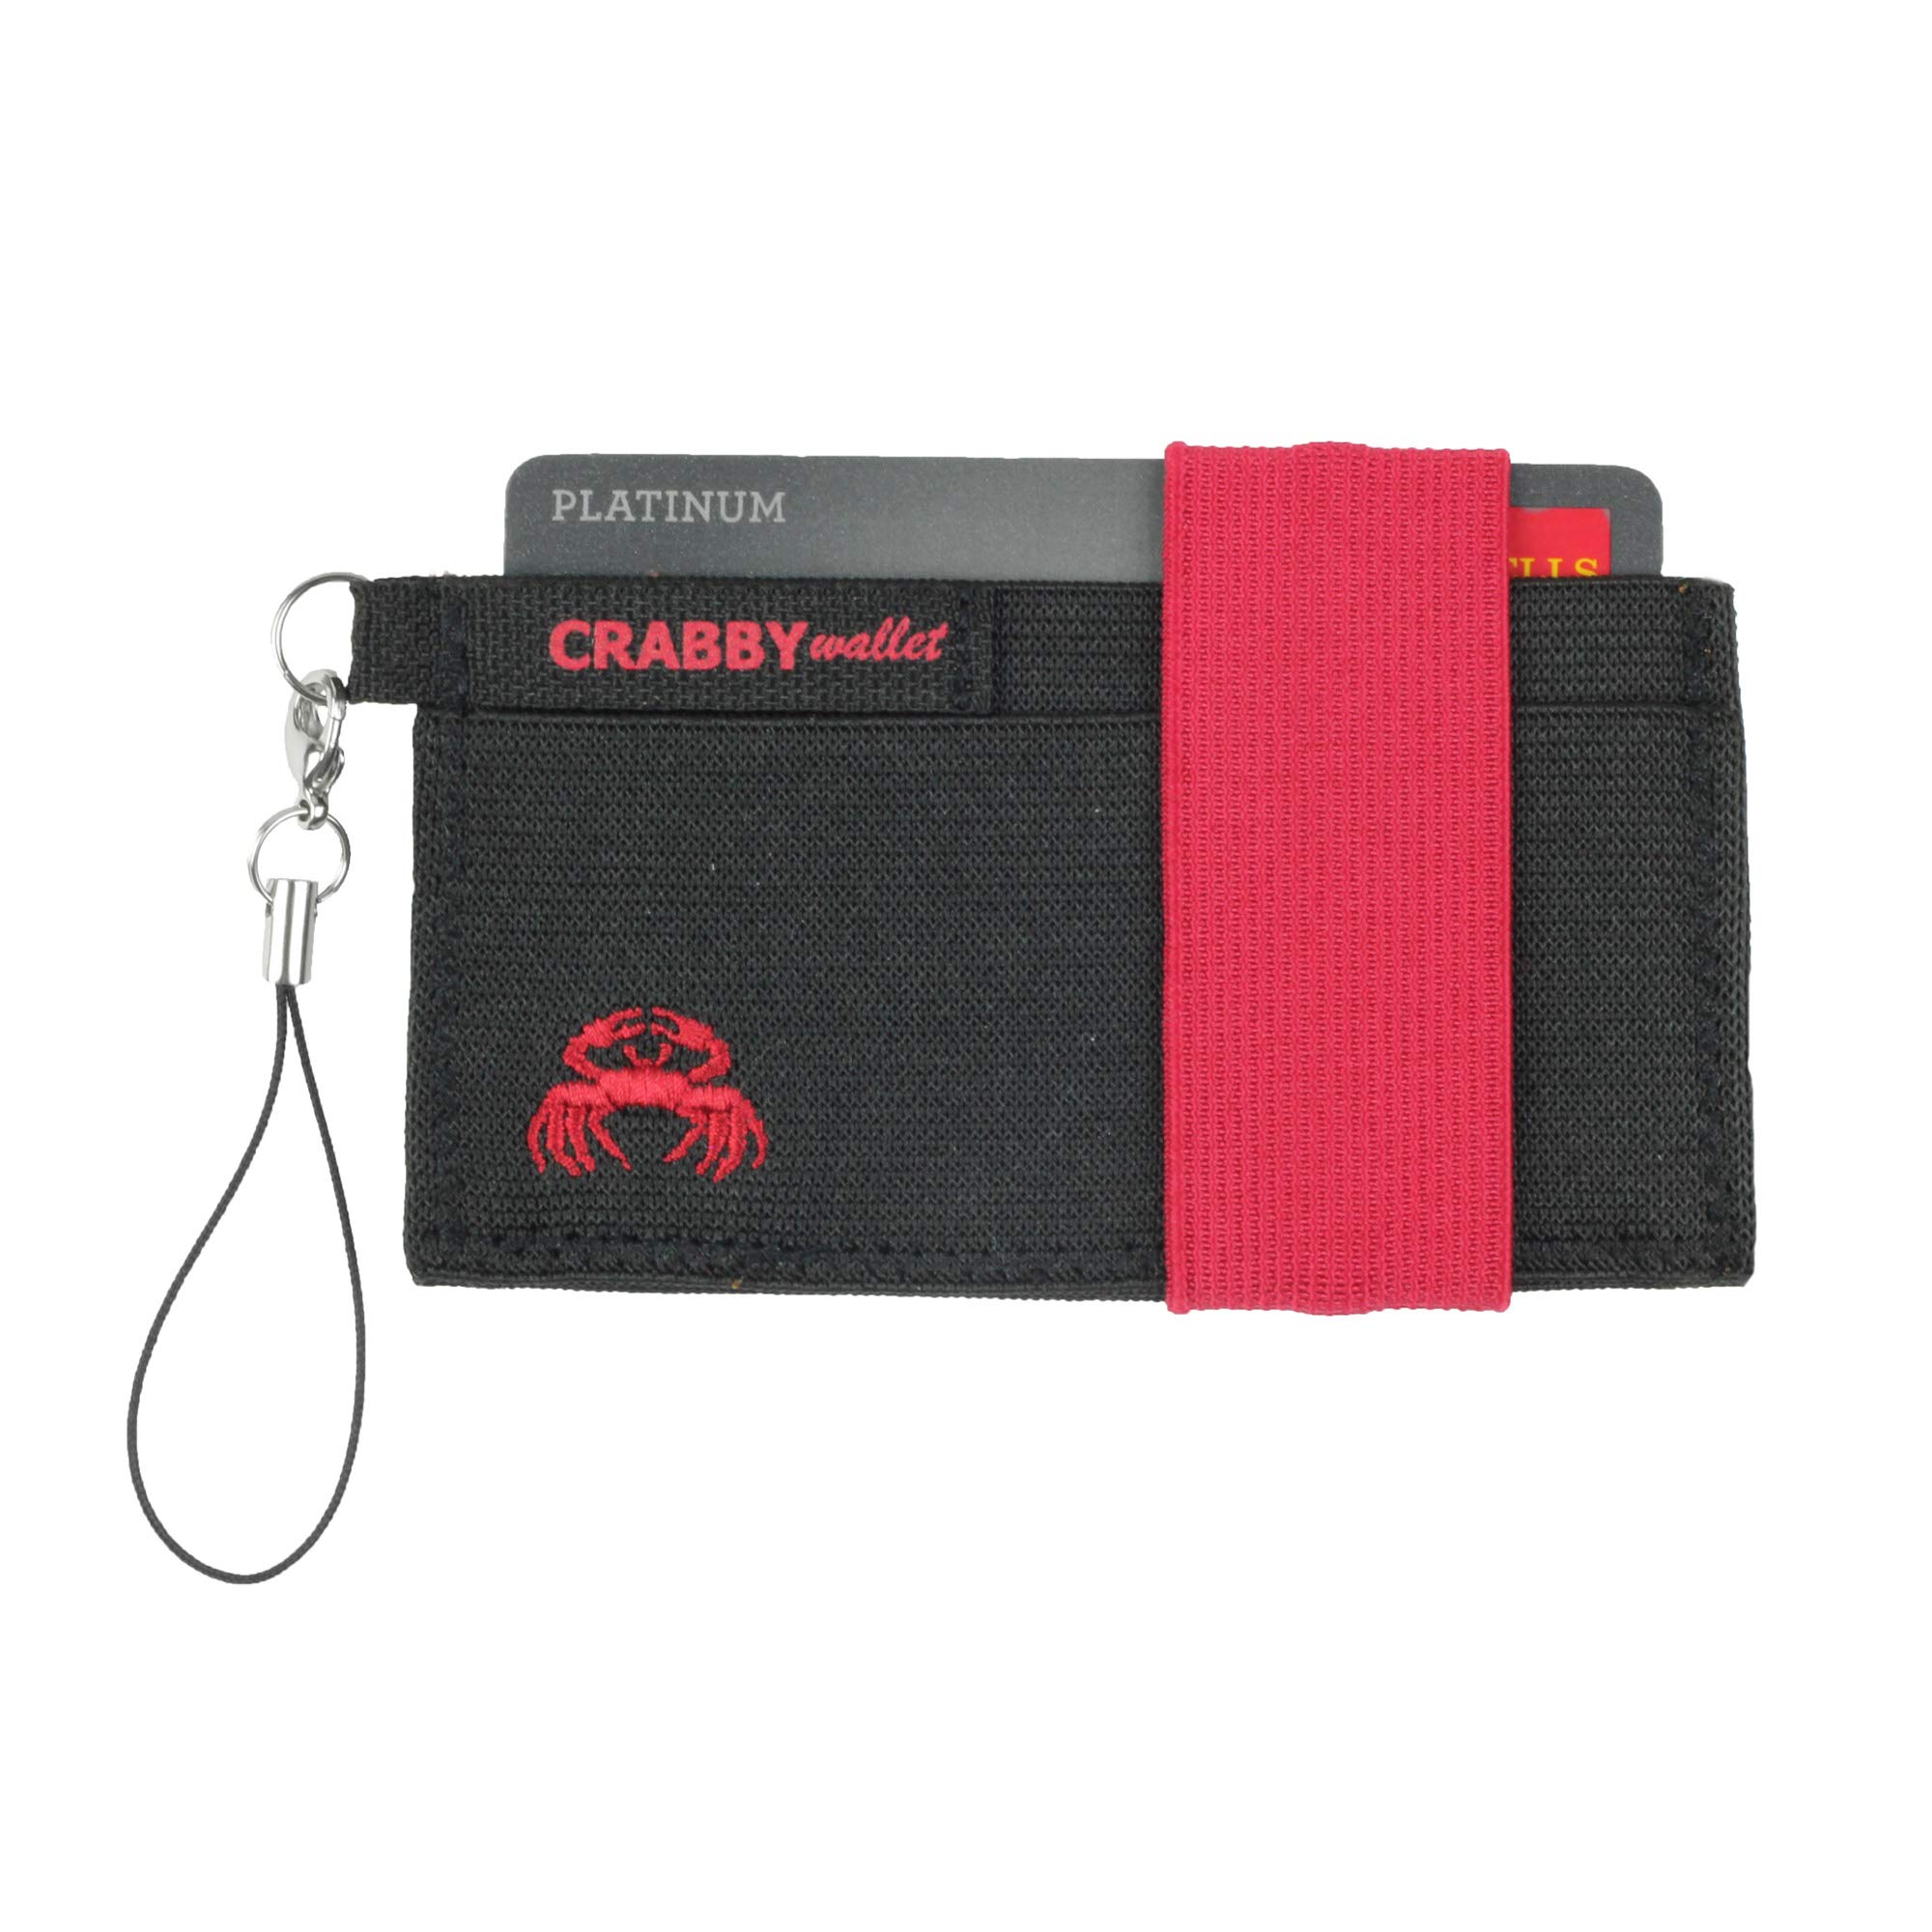 Crabby Gear - Front Pocket Wallet - Minimalist Wallet - Red - Elastic - Everyday Carry Cards, Cash, Phone, Keys - Securely Holds for Easy Access - Lobster Claw Keychain Included- Ultra Thin 4